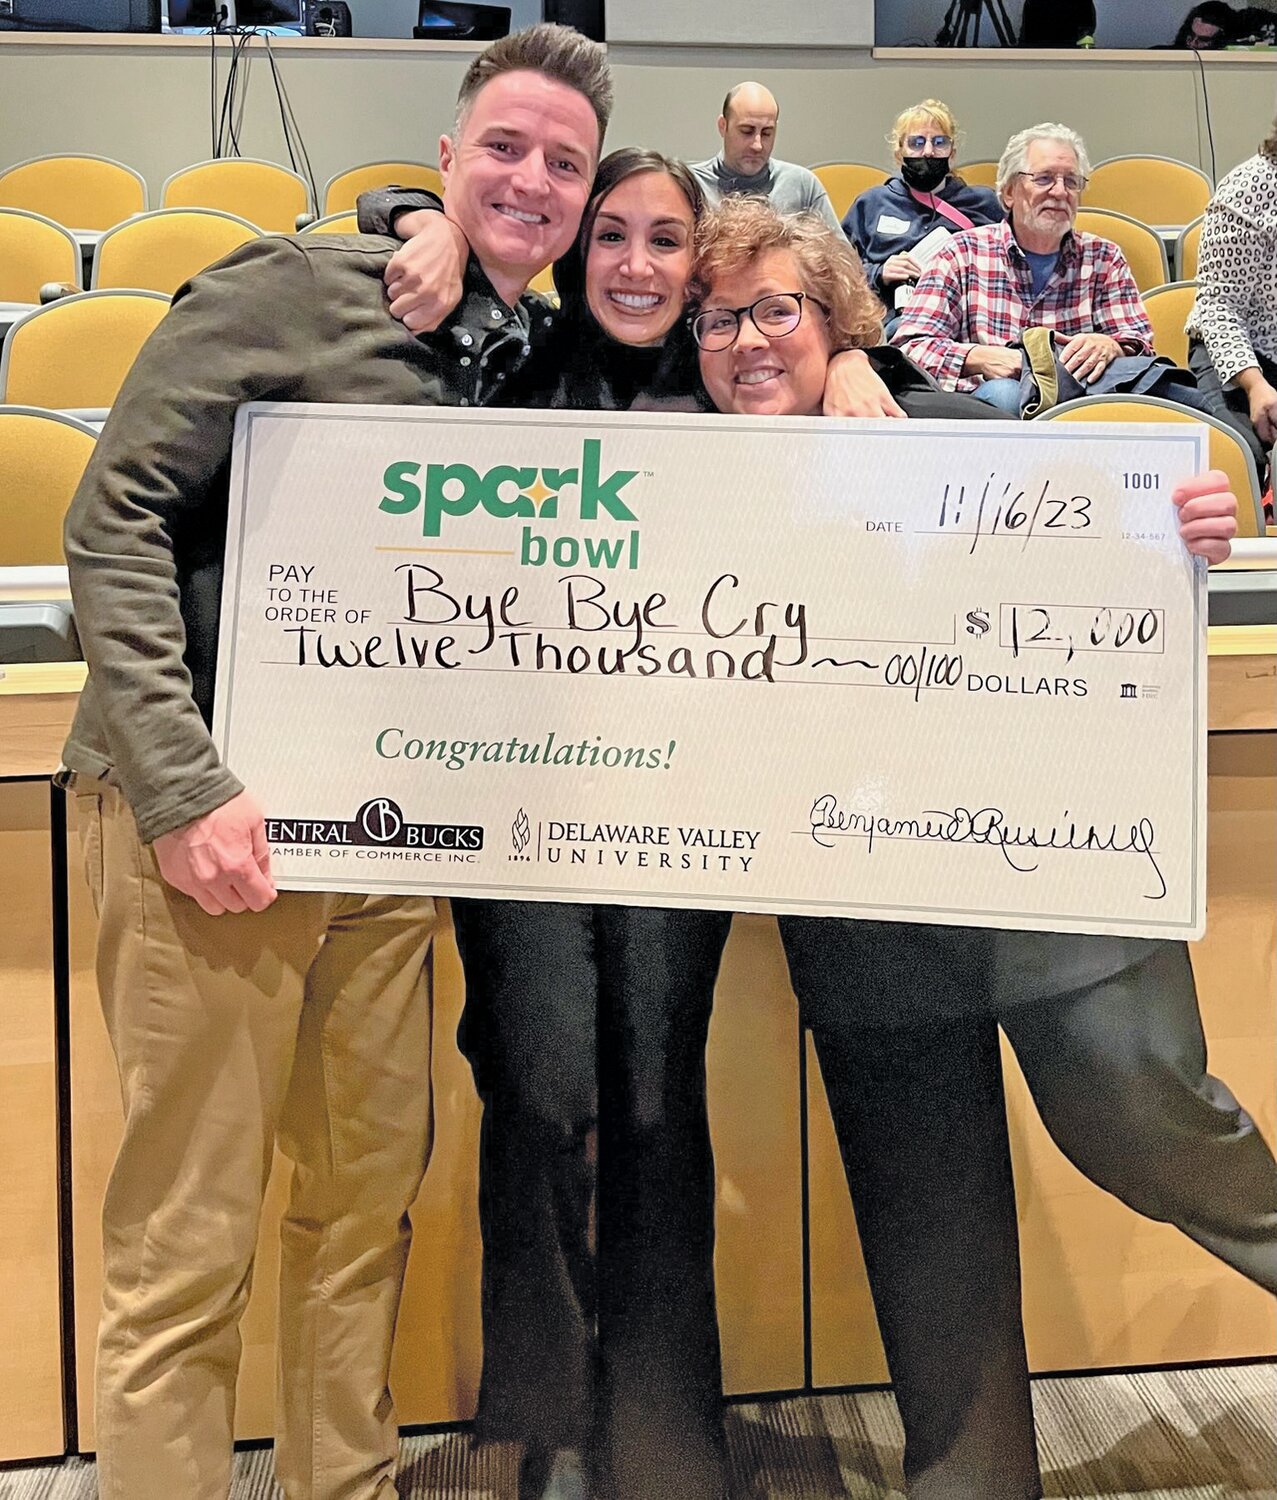 Samantha Myers, founder of ByeByeCry (center) accepts a $12,000 check from the recent Spark Bowl at Delaware Valley University, with husband Eddie and creative director Anita Haley.